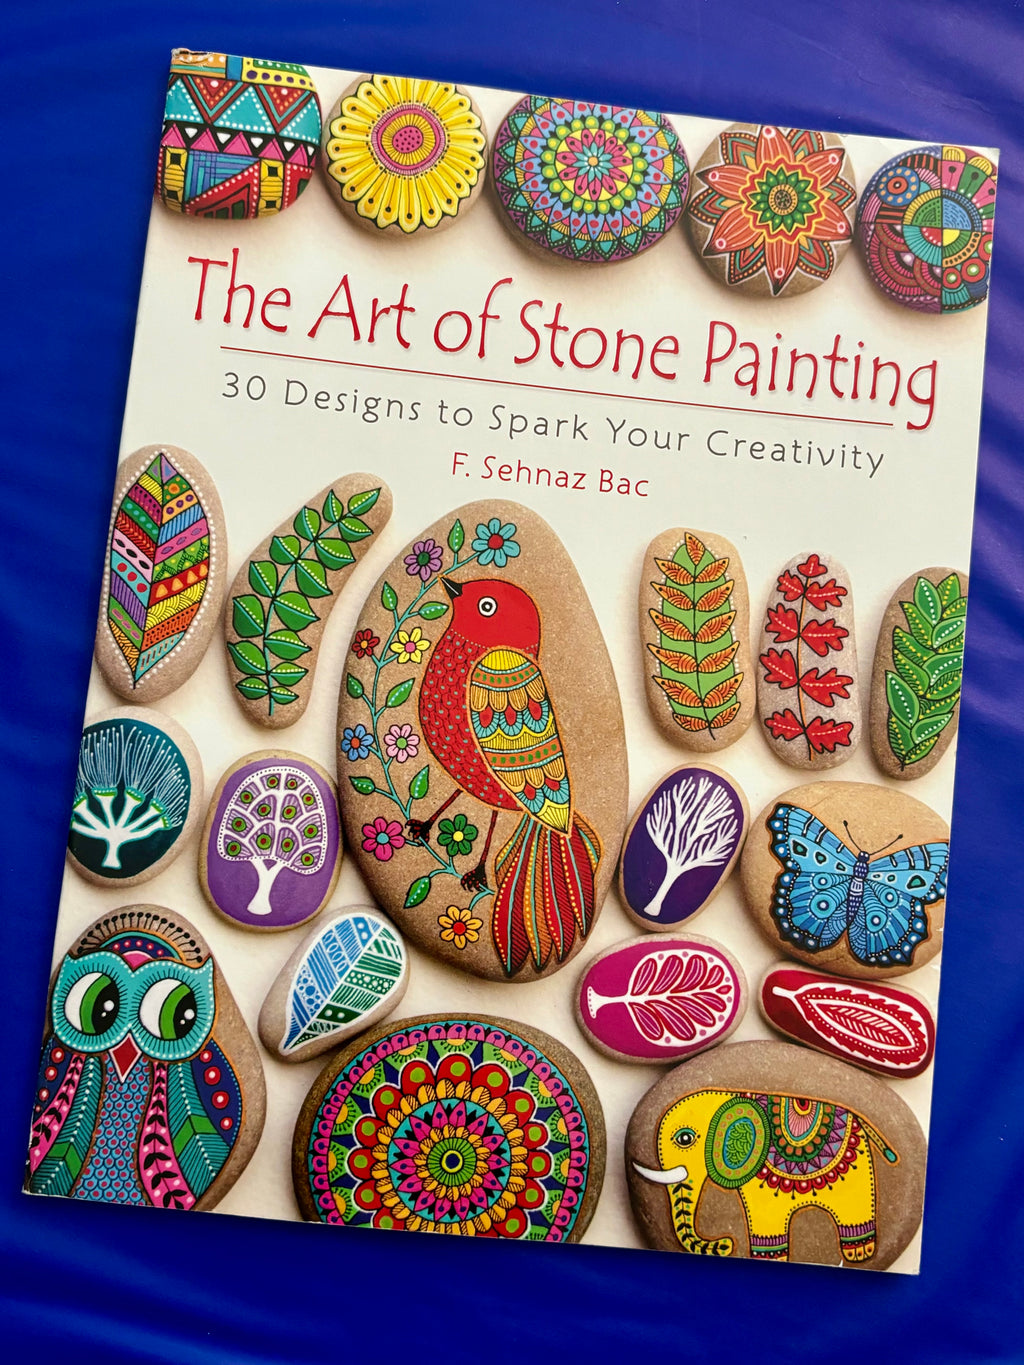 The Art of Stone Painting: 30 Designs to Spark Your Creativity- By F. Sehnaz Bac